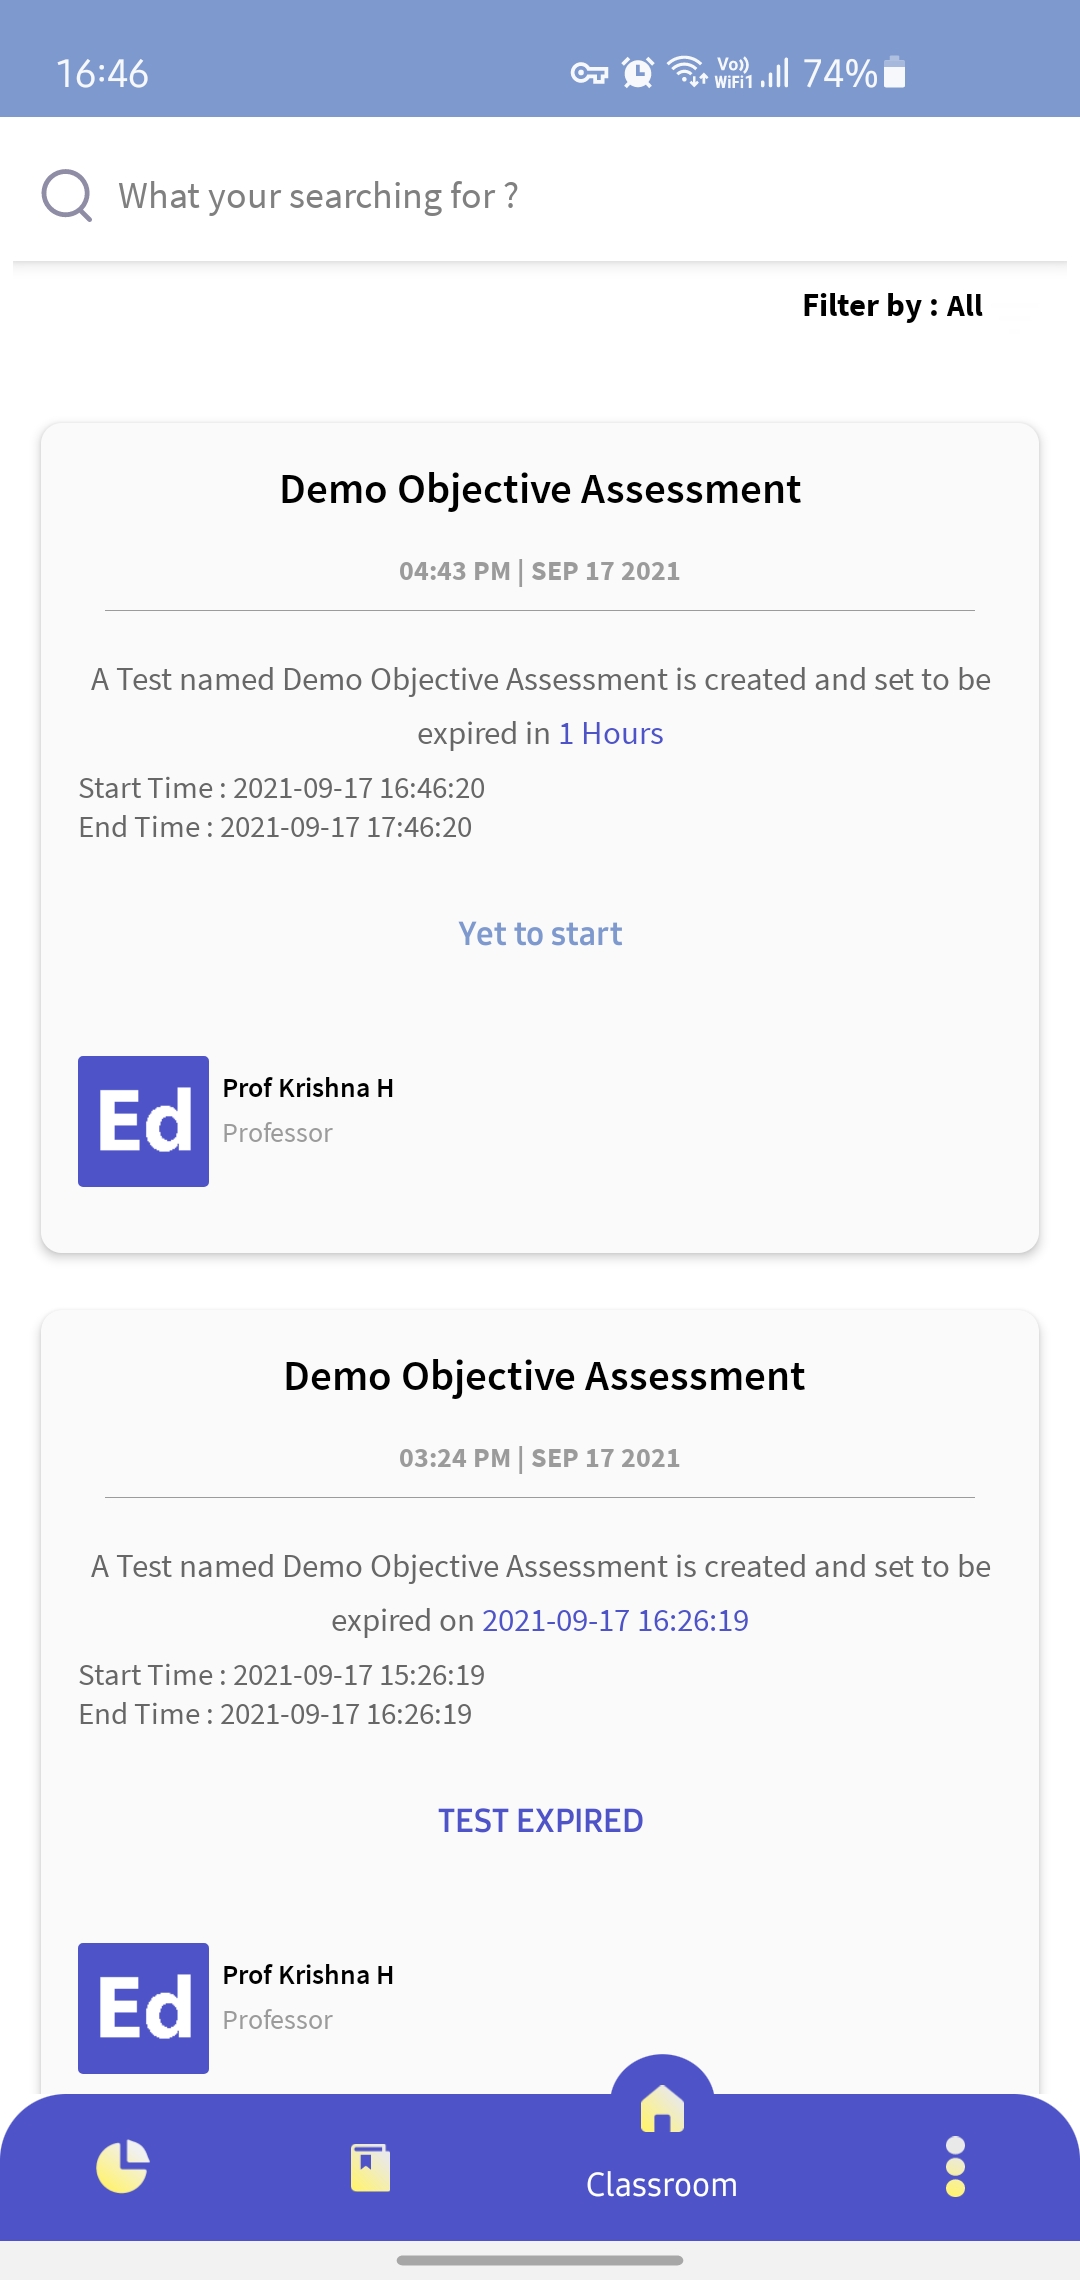 1. You can take an objective assessment from the Dashboard or Classroom Tab.